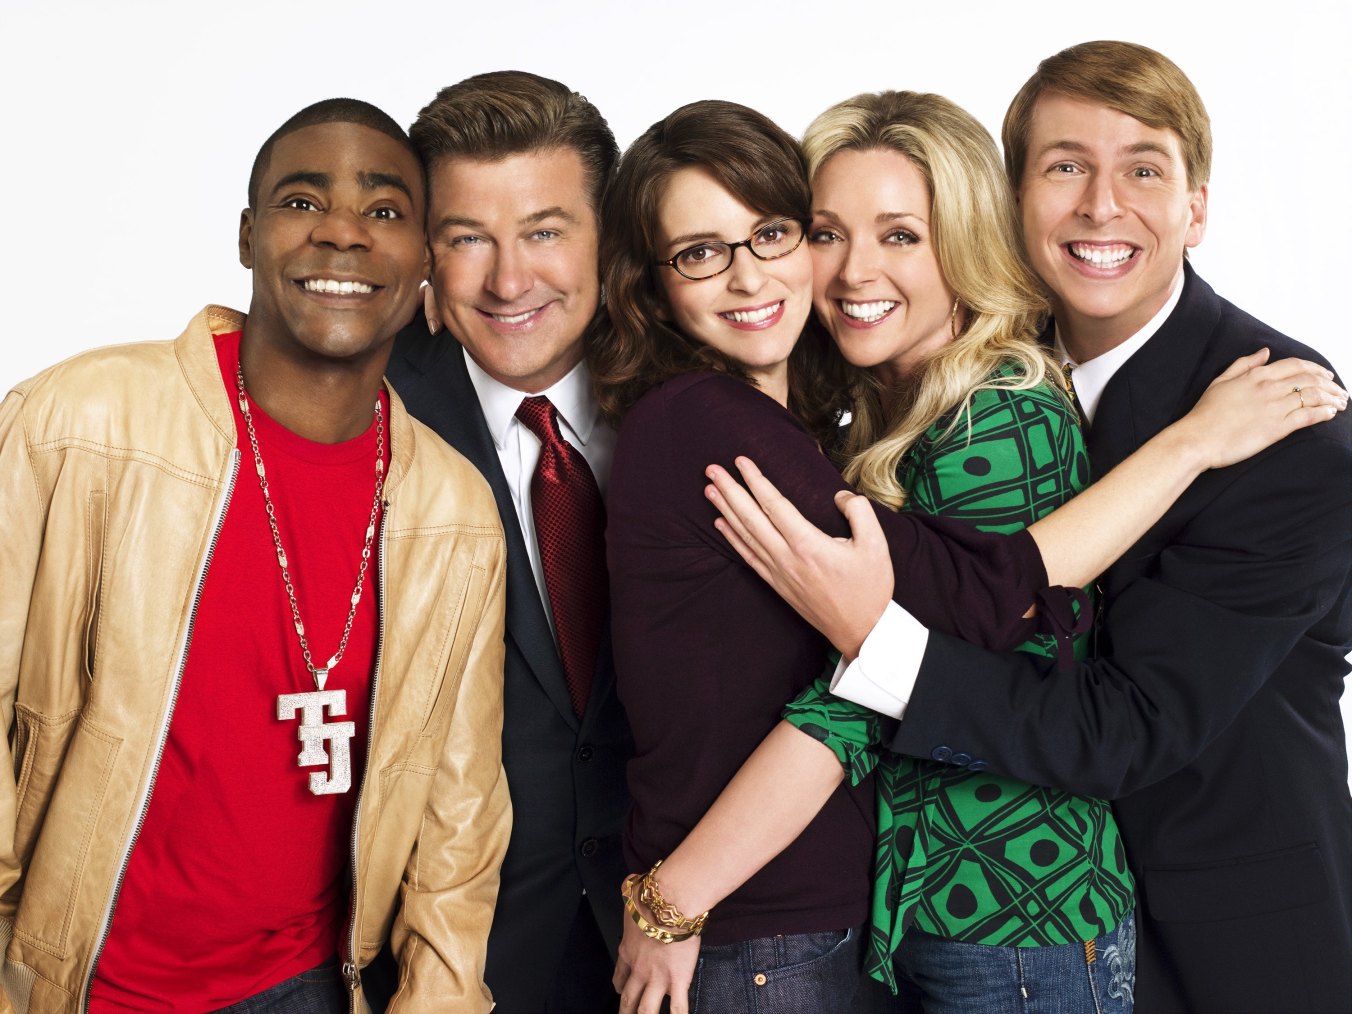 30 Rock: A One-Time Special Brings Back Tracy, Jenna, Liz, and Jack